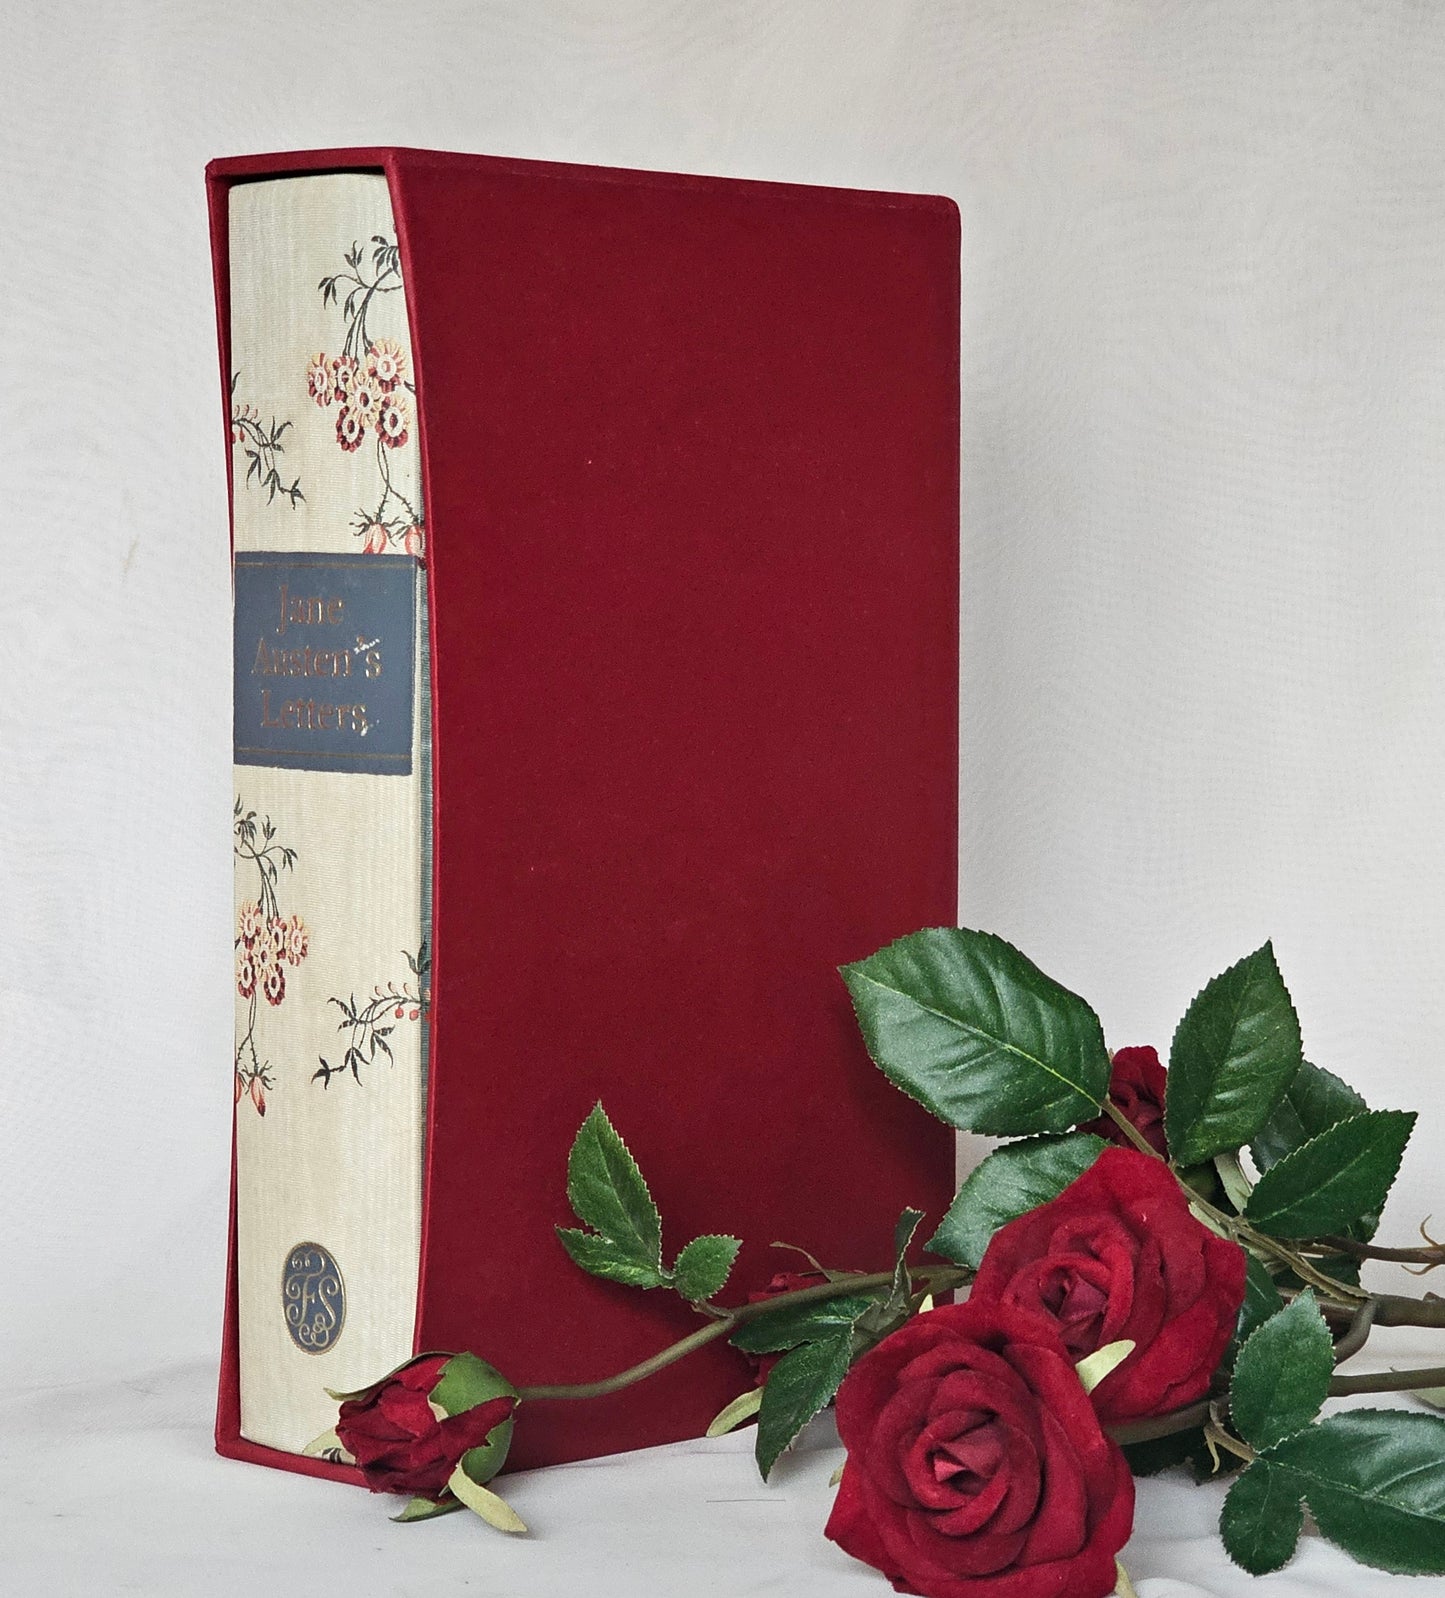 2003 Jane Austen's Letters, Collected and Edited by Deirdre Le Faye / Folio Society, London / Richly Illustrated/ Bound in Silk / Slipcase